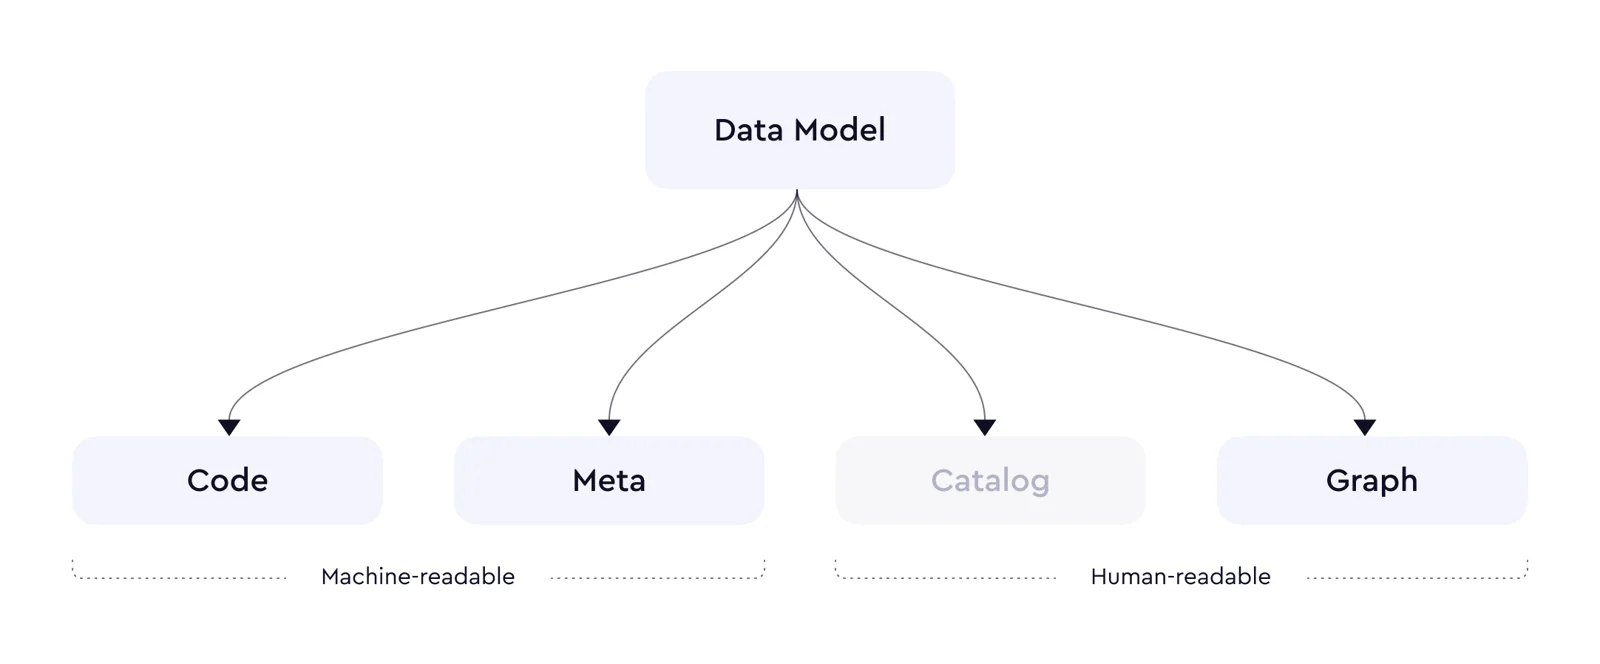 Human-readable and machine-readable representations of the data model